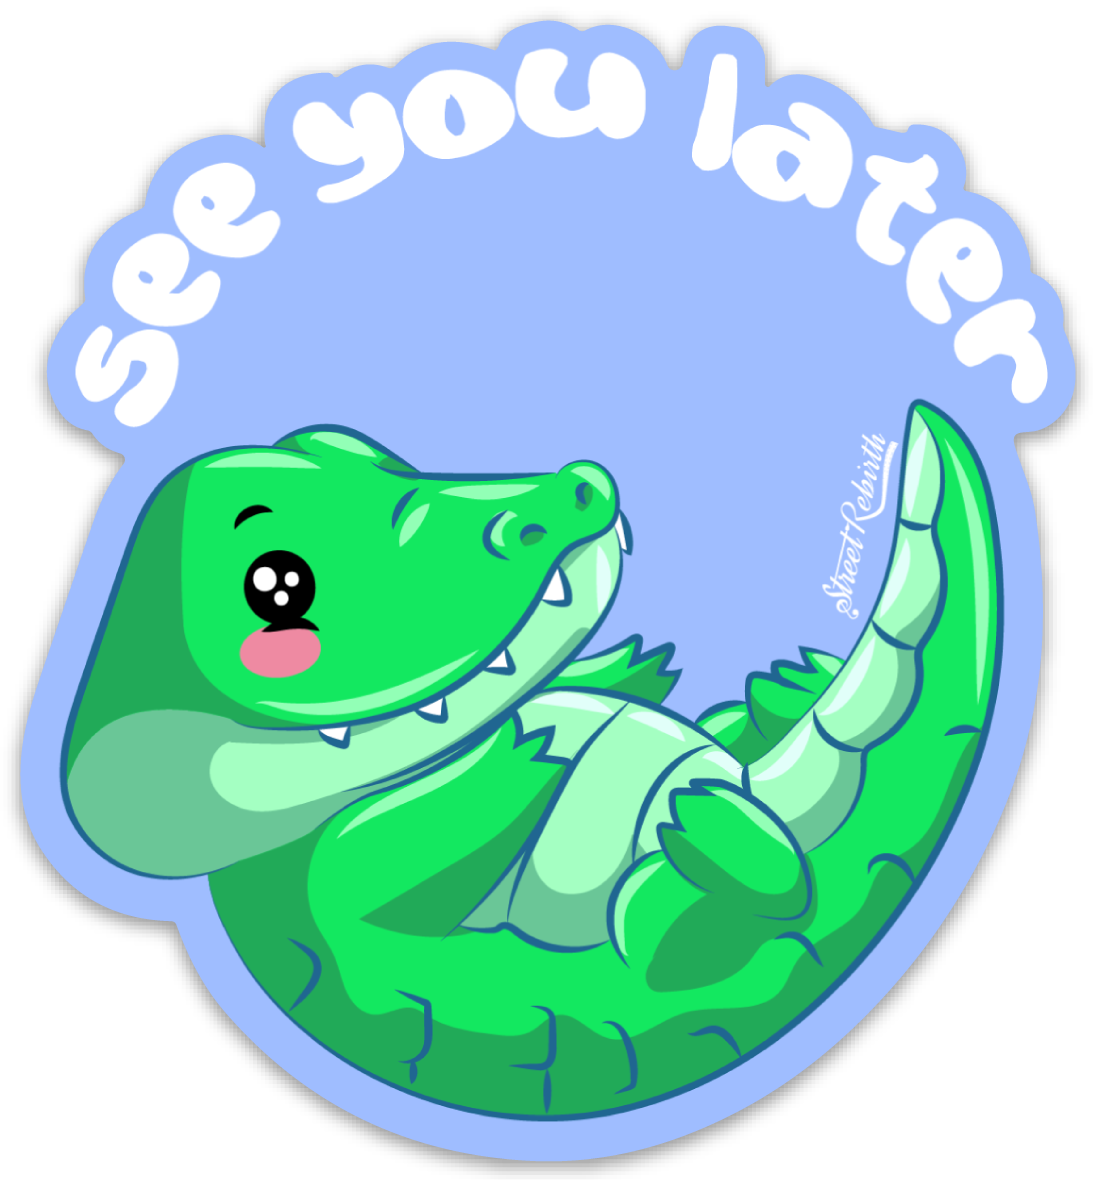 See You Later PUN STICKER – ONE 4 INCH WATER PROOF VINYL STICKER – FOR HYDRO FLASK, SKATEBOARD, LAPTOP, PLANNER, CAR, COLLECTING, GIFTING